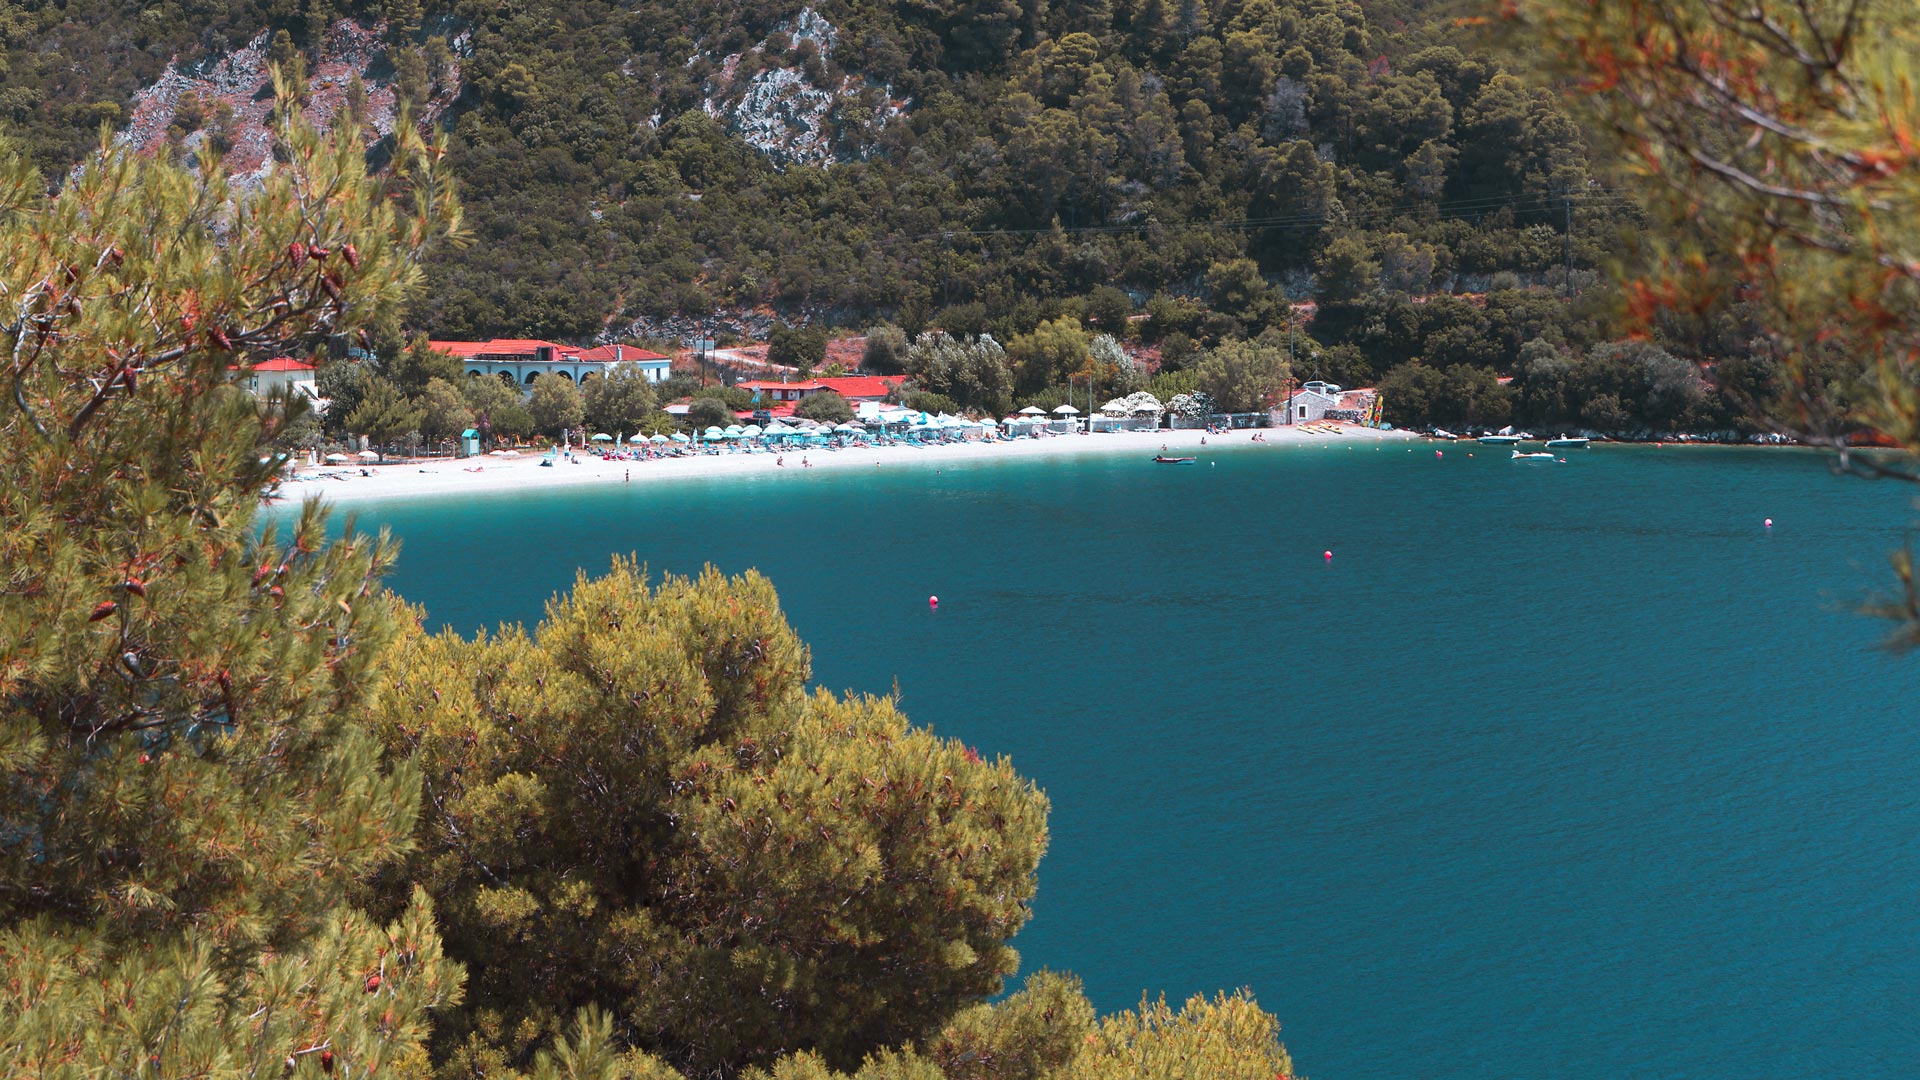 Panormos beach effortlessly captures the essence of an island characterised by lush greenery and a picture-perfect coastline